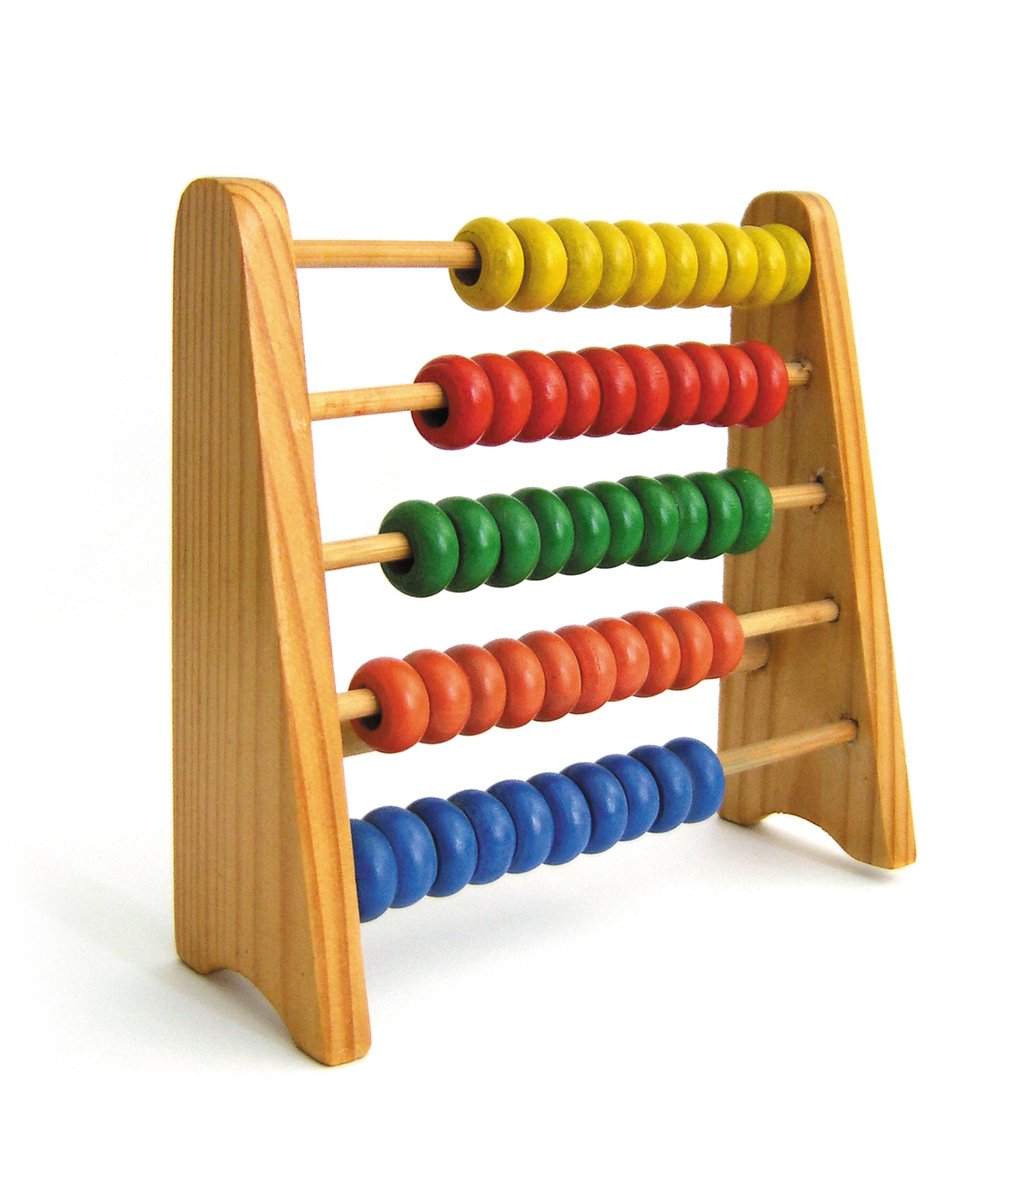 an abant toy with multi colored wooden rods